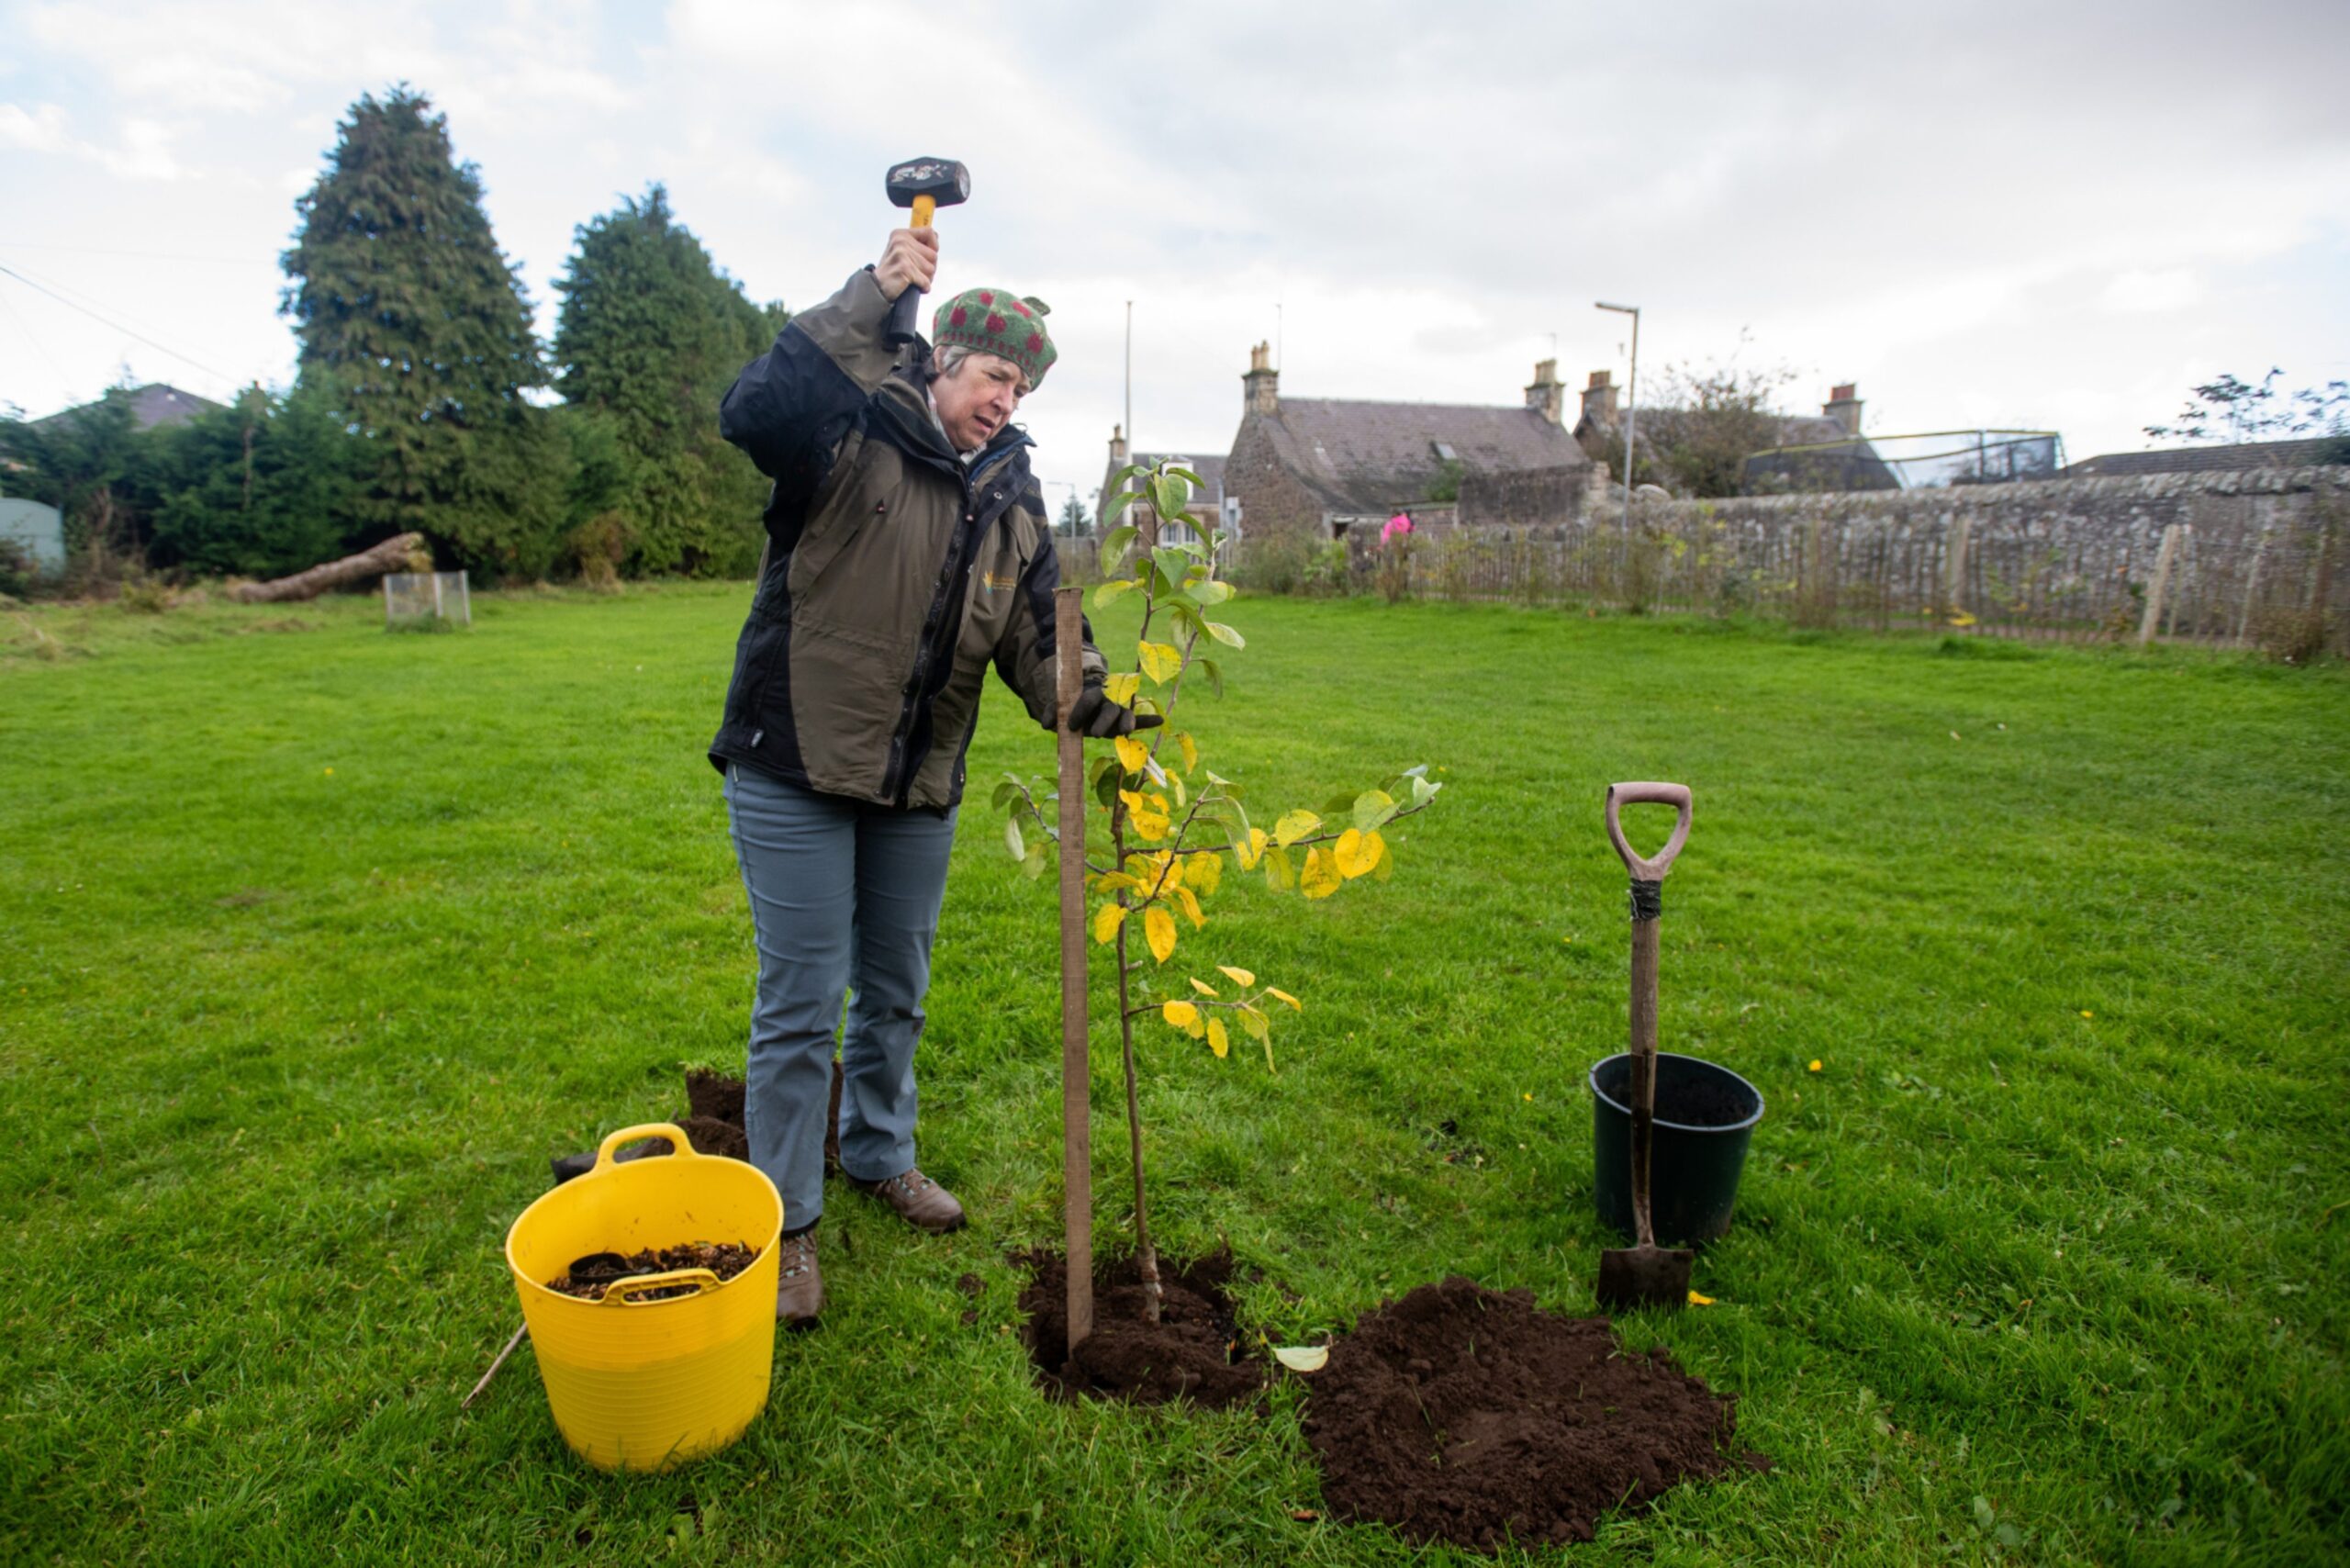 Gillian Fyfe hammers in the stake to keep the Scotch Bridget apple stable. There is a spade and a bucket to her right, and a grassy field behind, and a yellow bucket packed with mulch. 